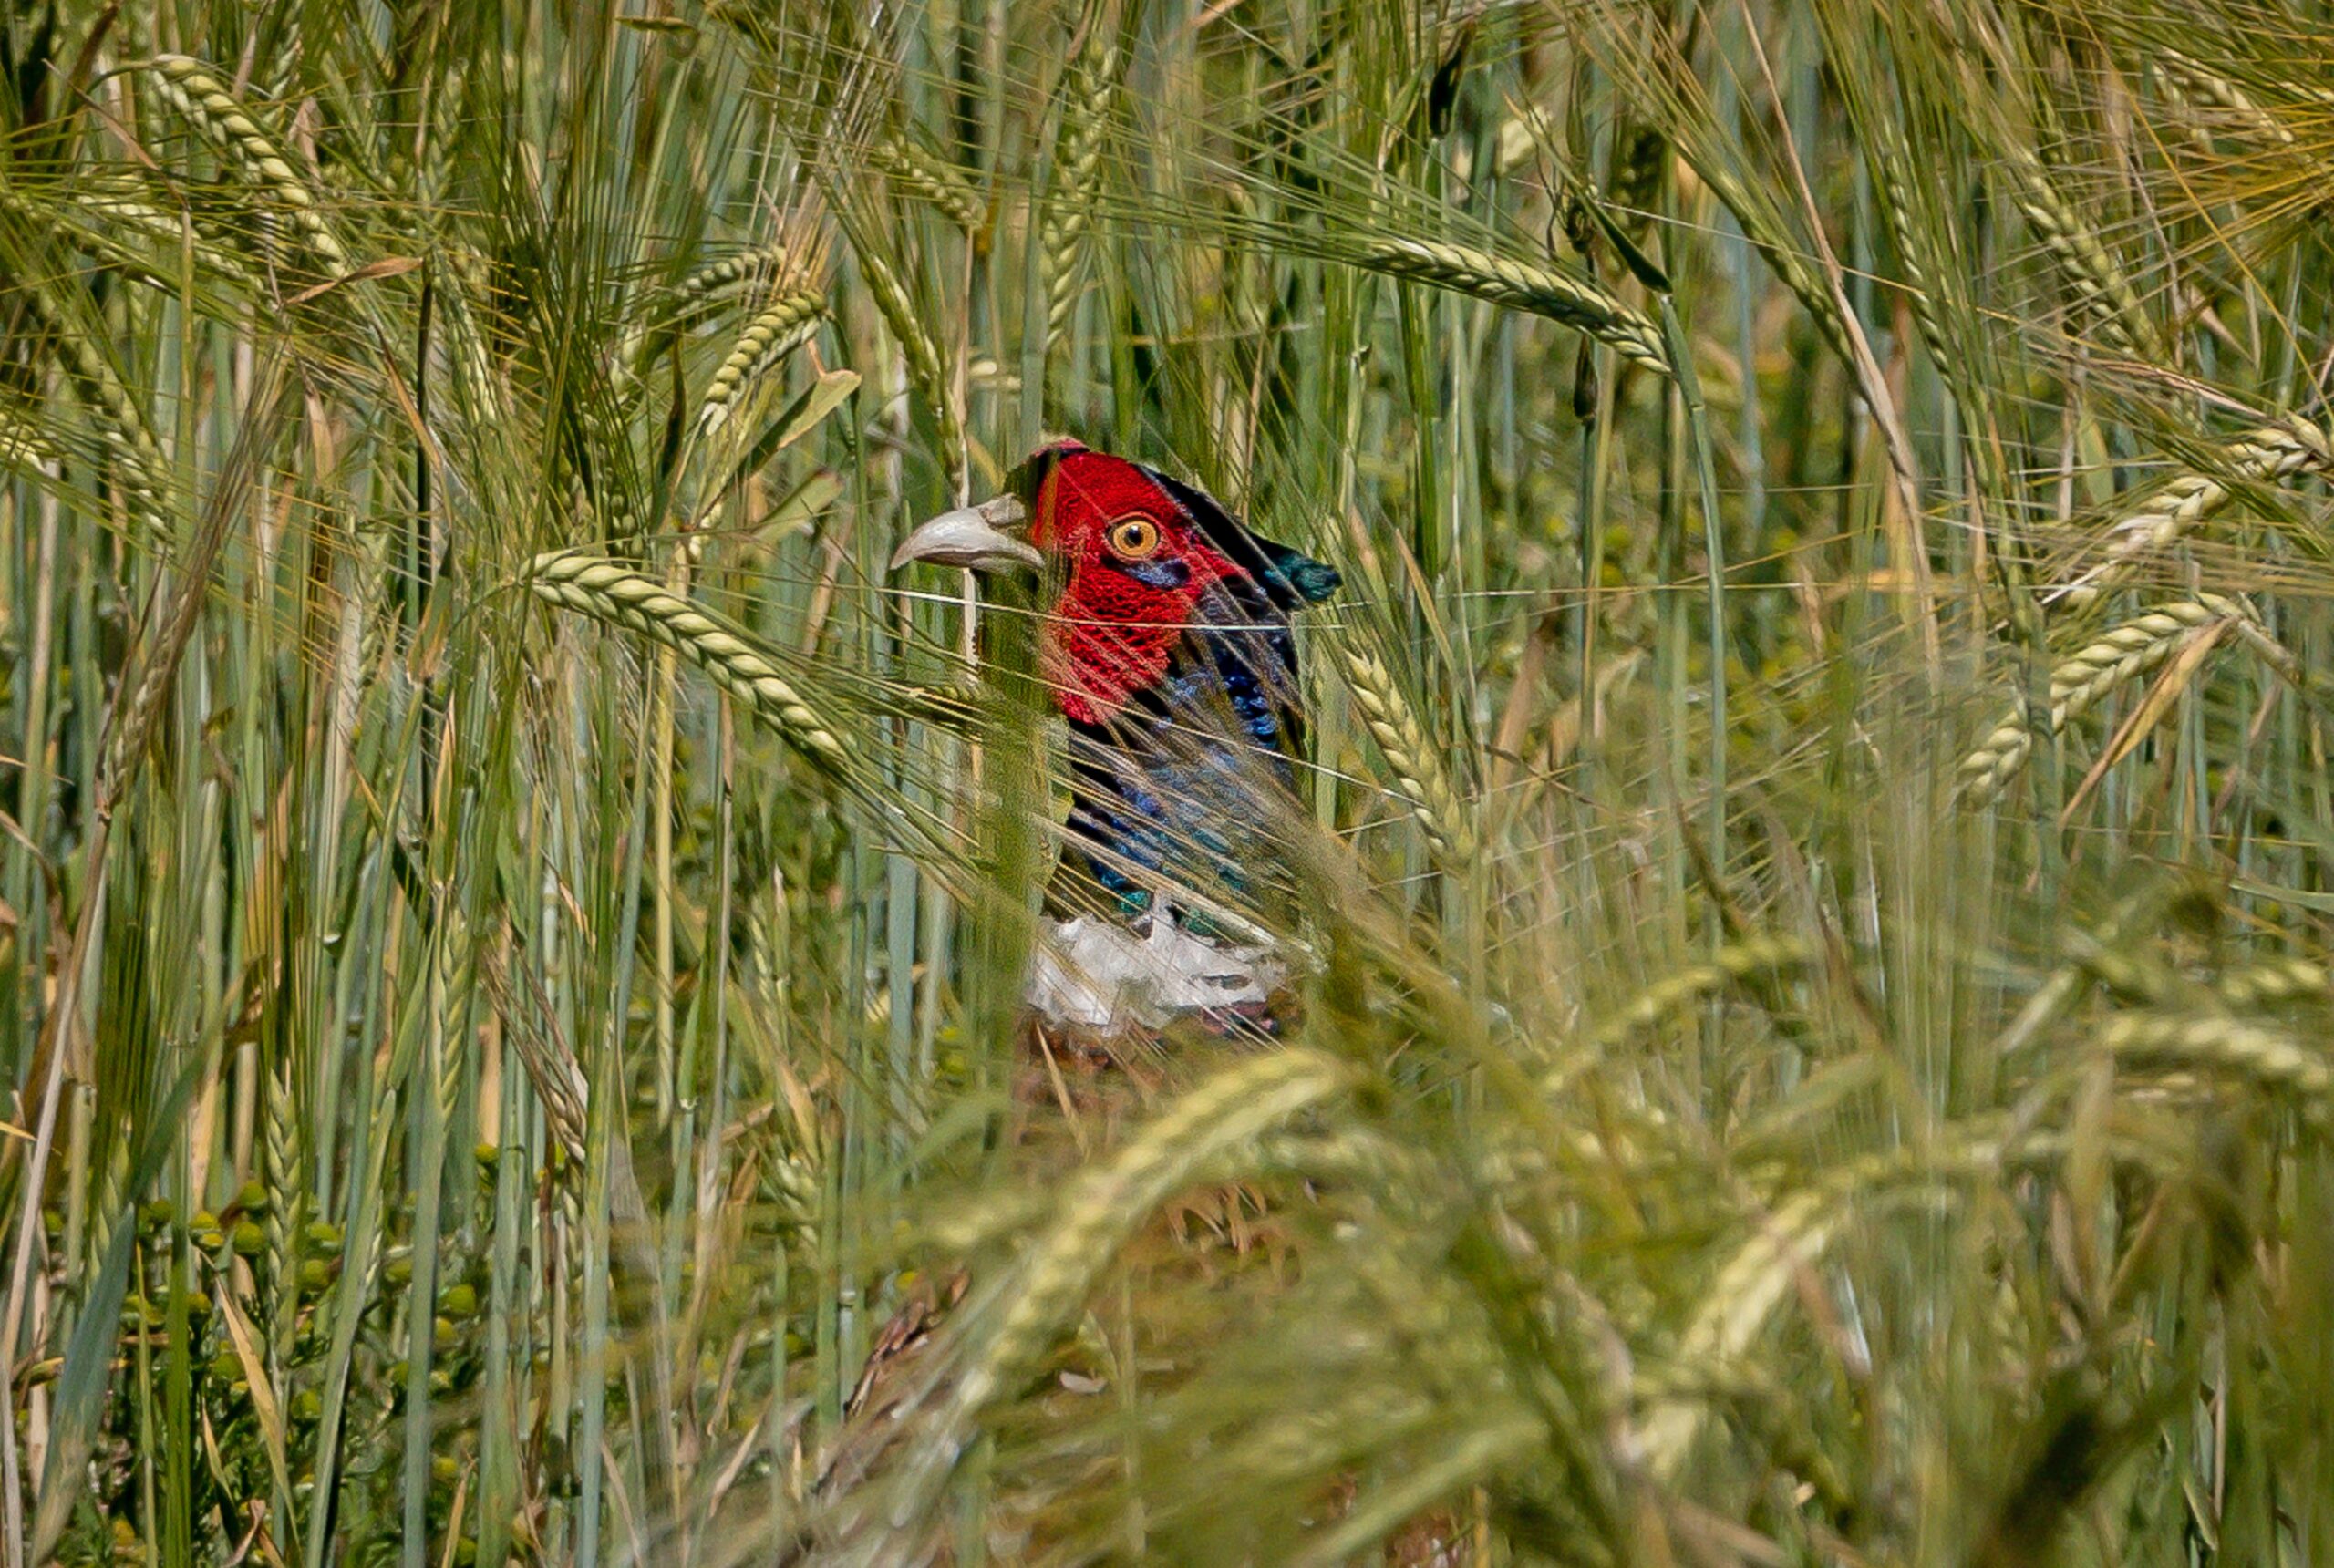 A bird with a red face in long grass in Dartmouth.